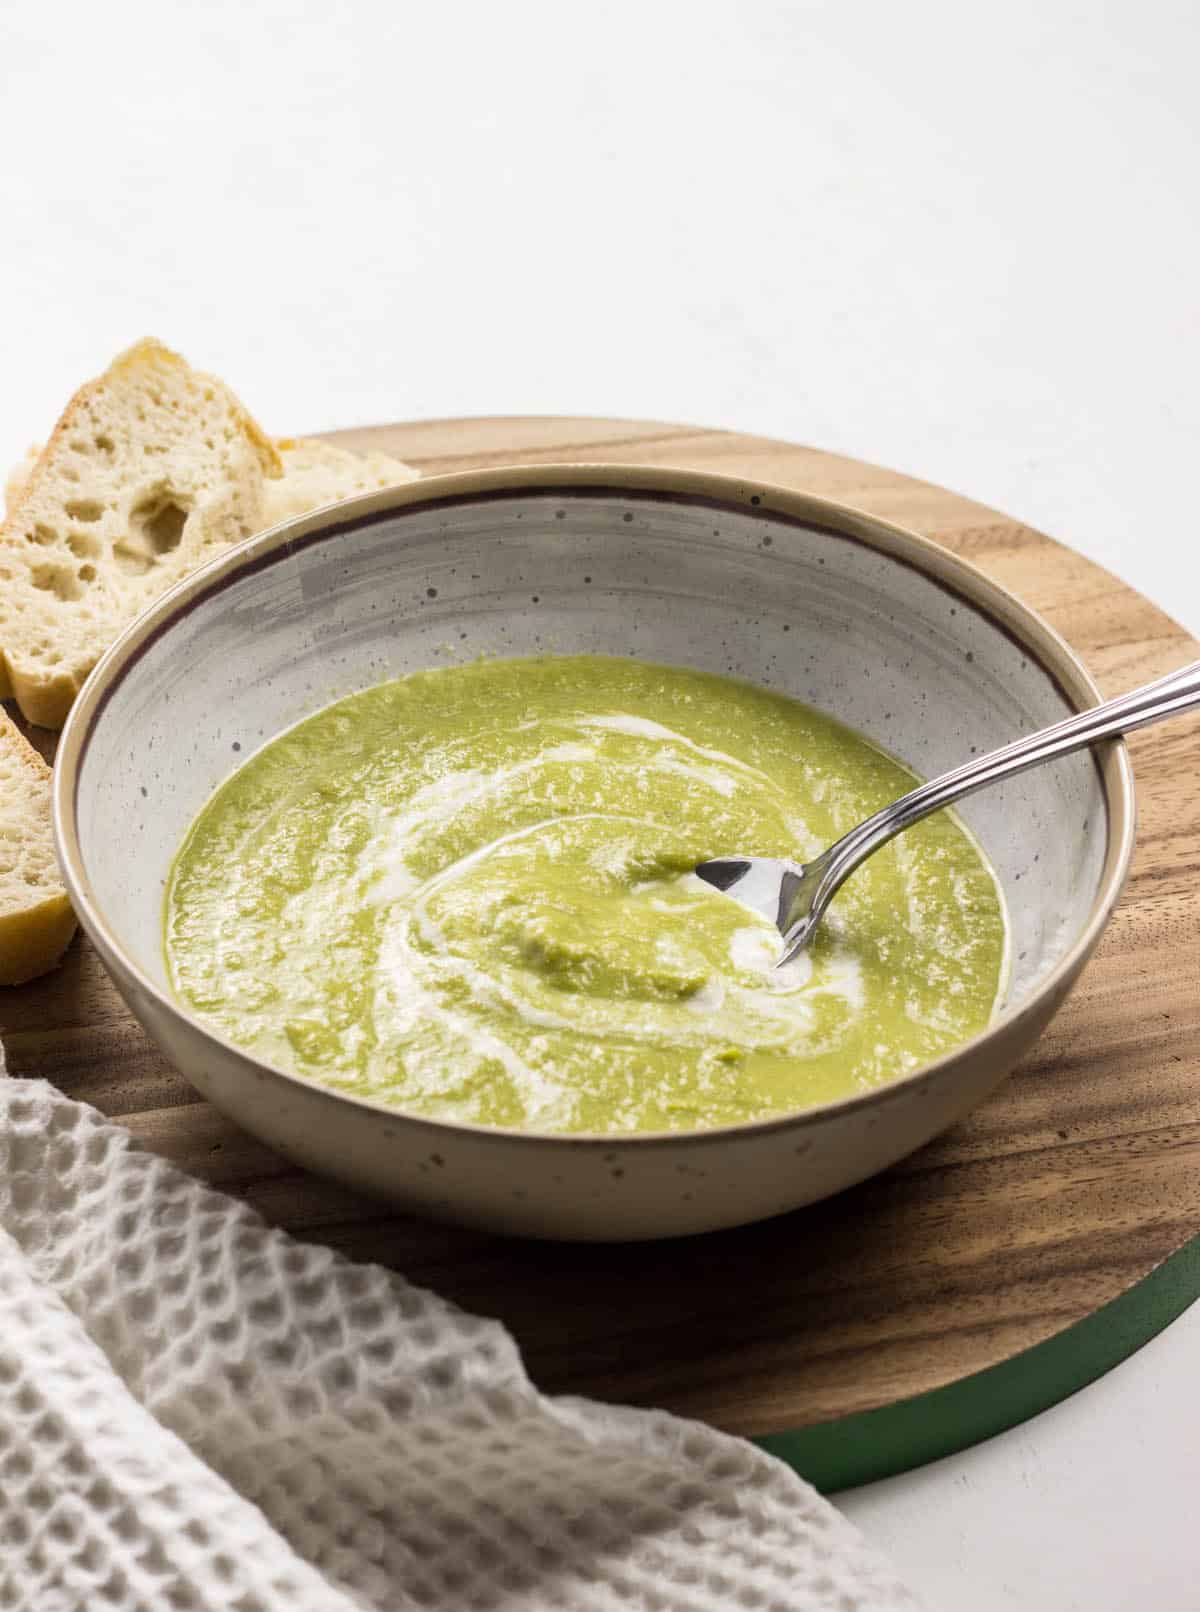 Creamy Asparagus Soup in a bowl on a wooden board with bread to the side.